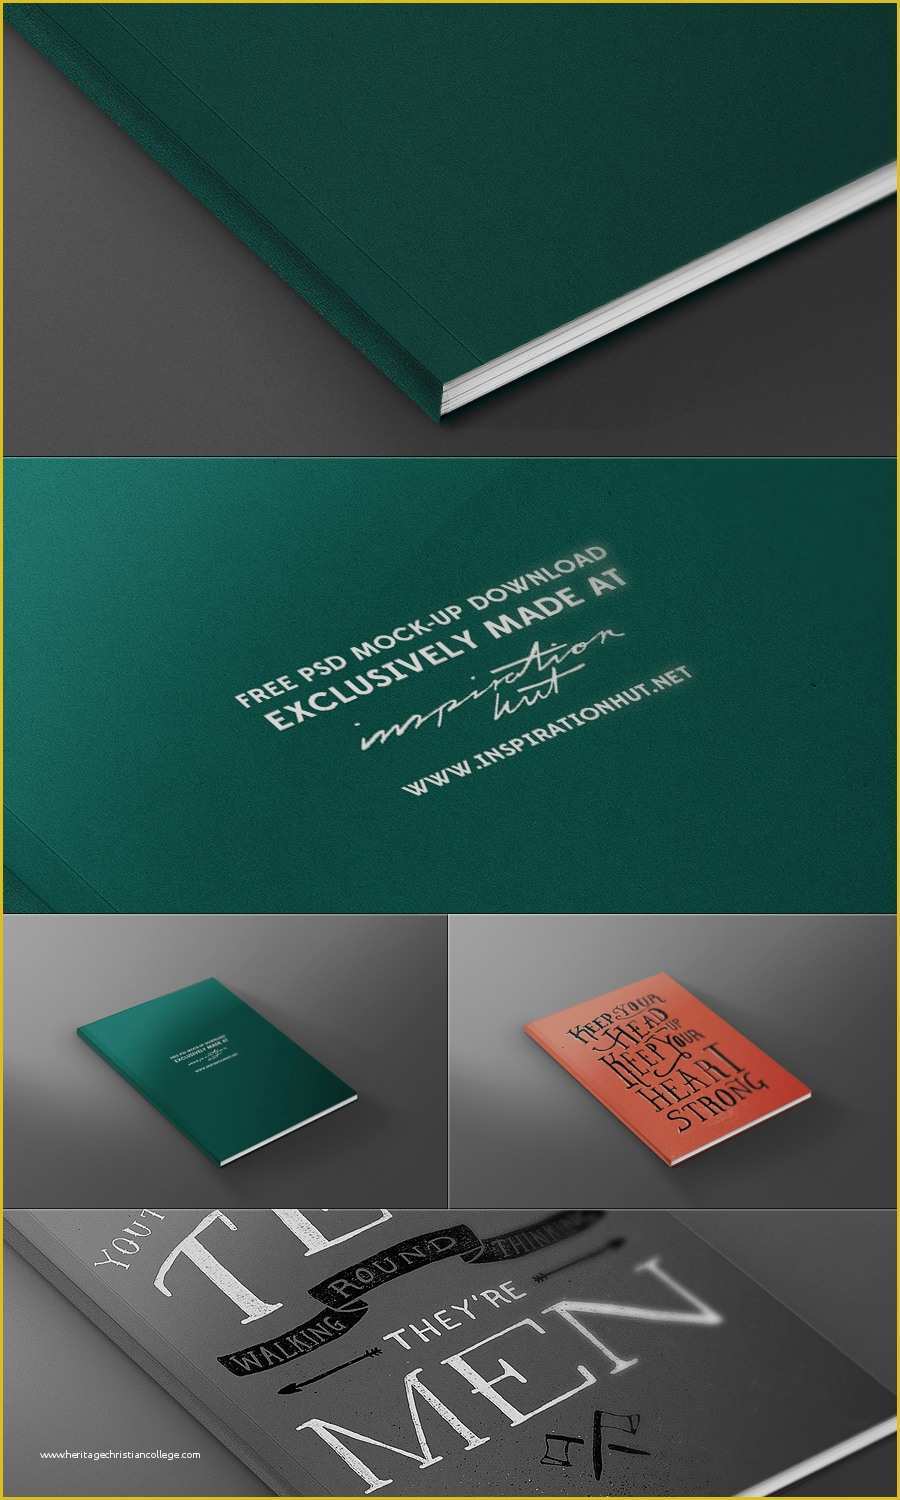 Free Mockup Templates Of Free Magazine Book Front Cover Mock Up Template Psd File